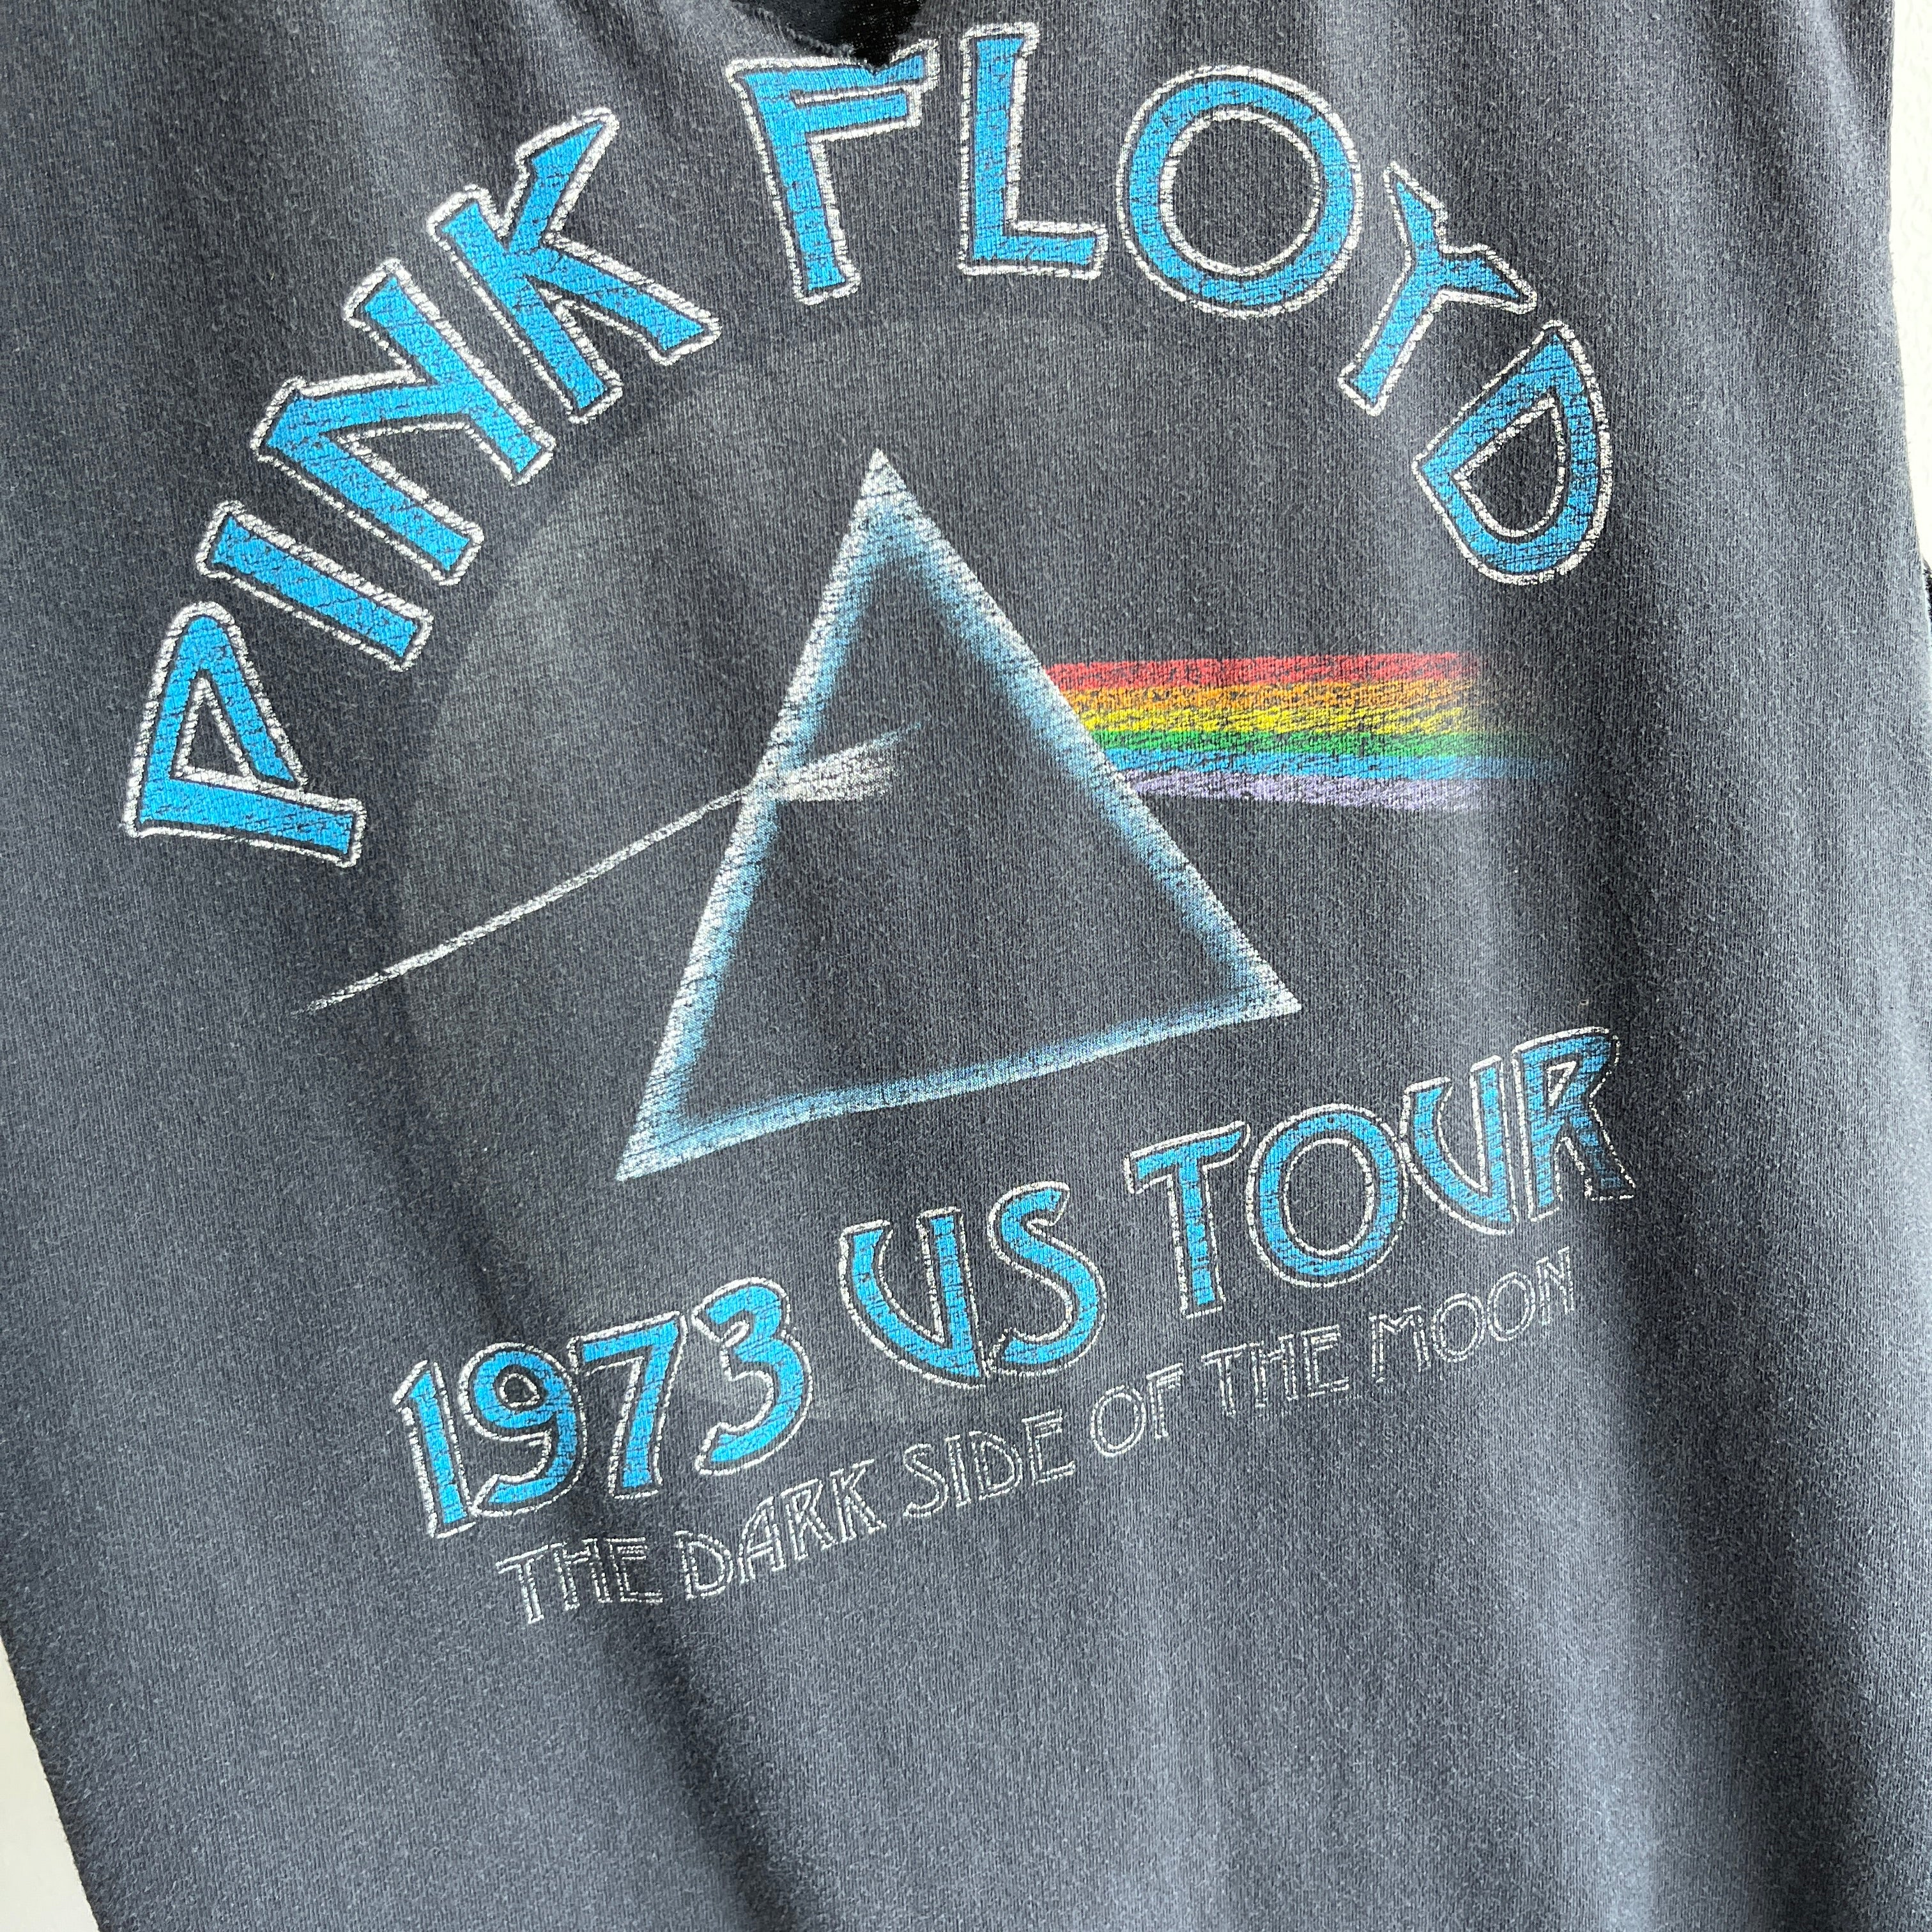 2000s Pink Floyd Cut Sleeve and Neck T-Shirt - Not Technically Vintage